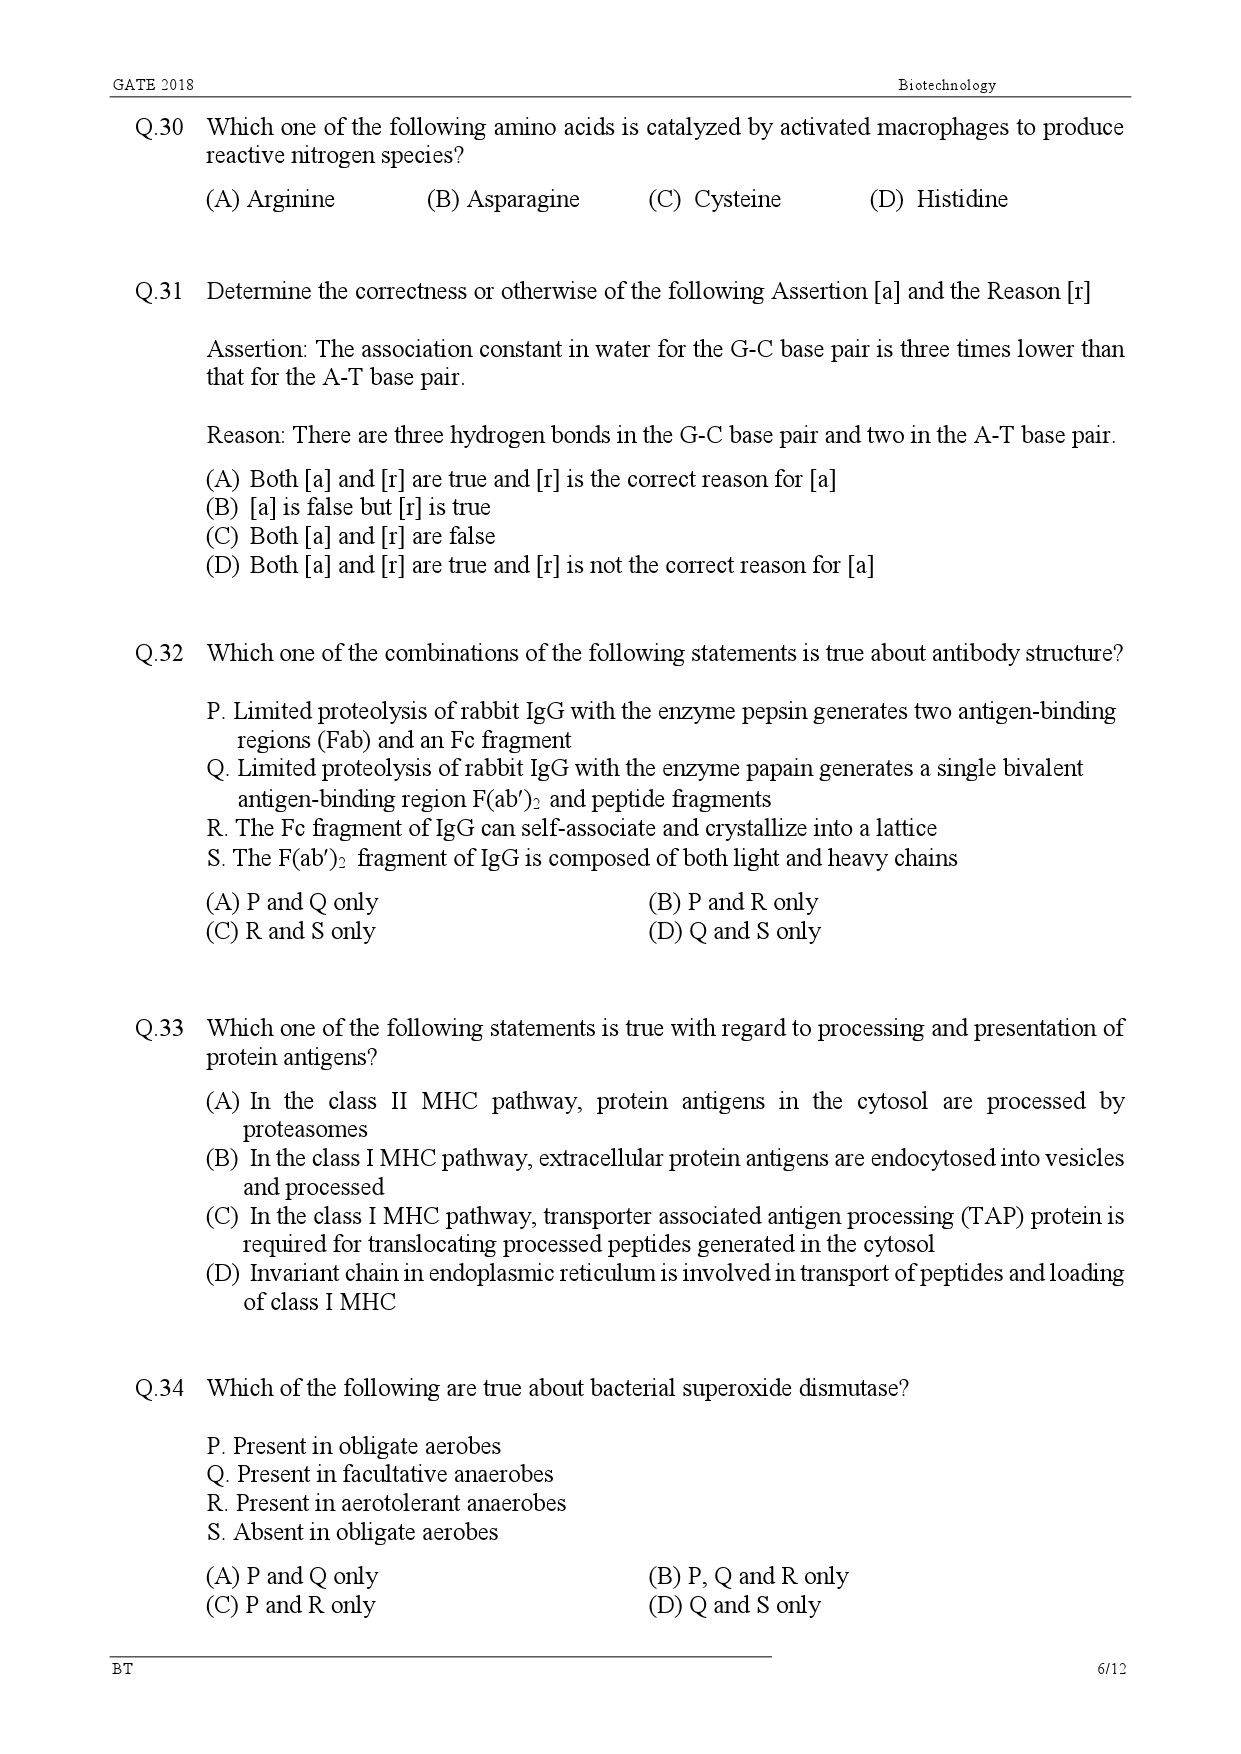 GATE Exam Question Paper 2018 Biotechnology 8